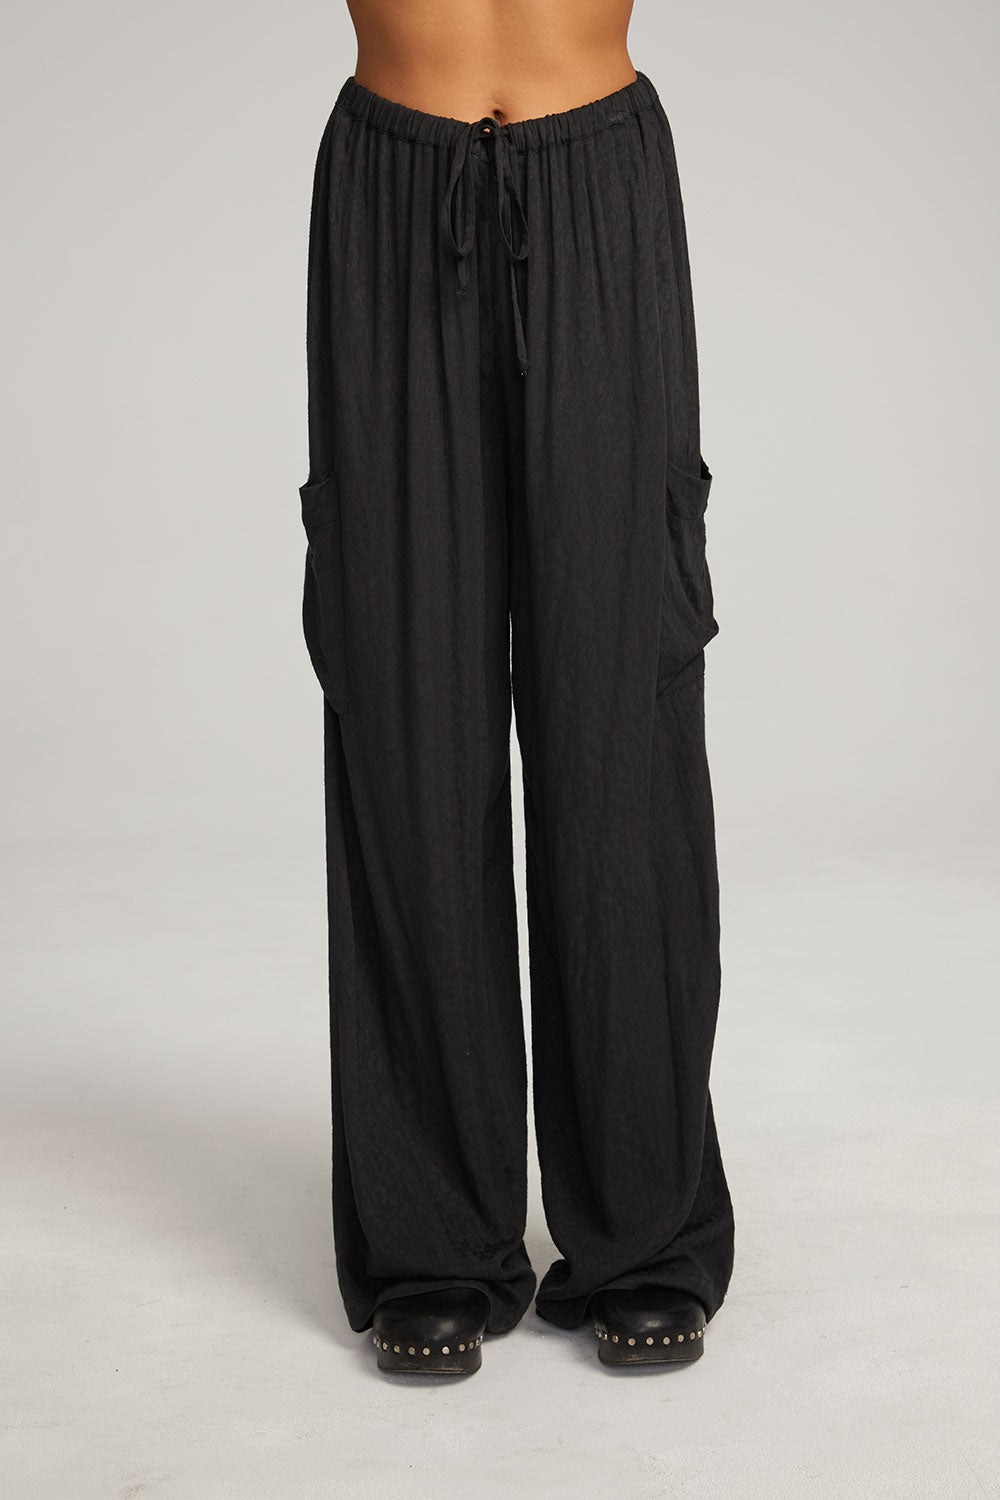 Lee Licorice Trousers WOMENS chaserbrand